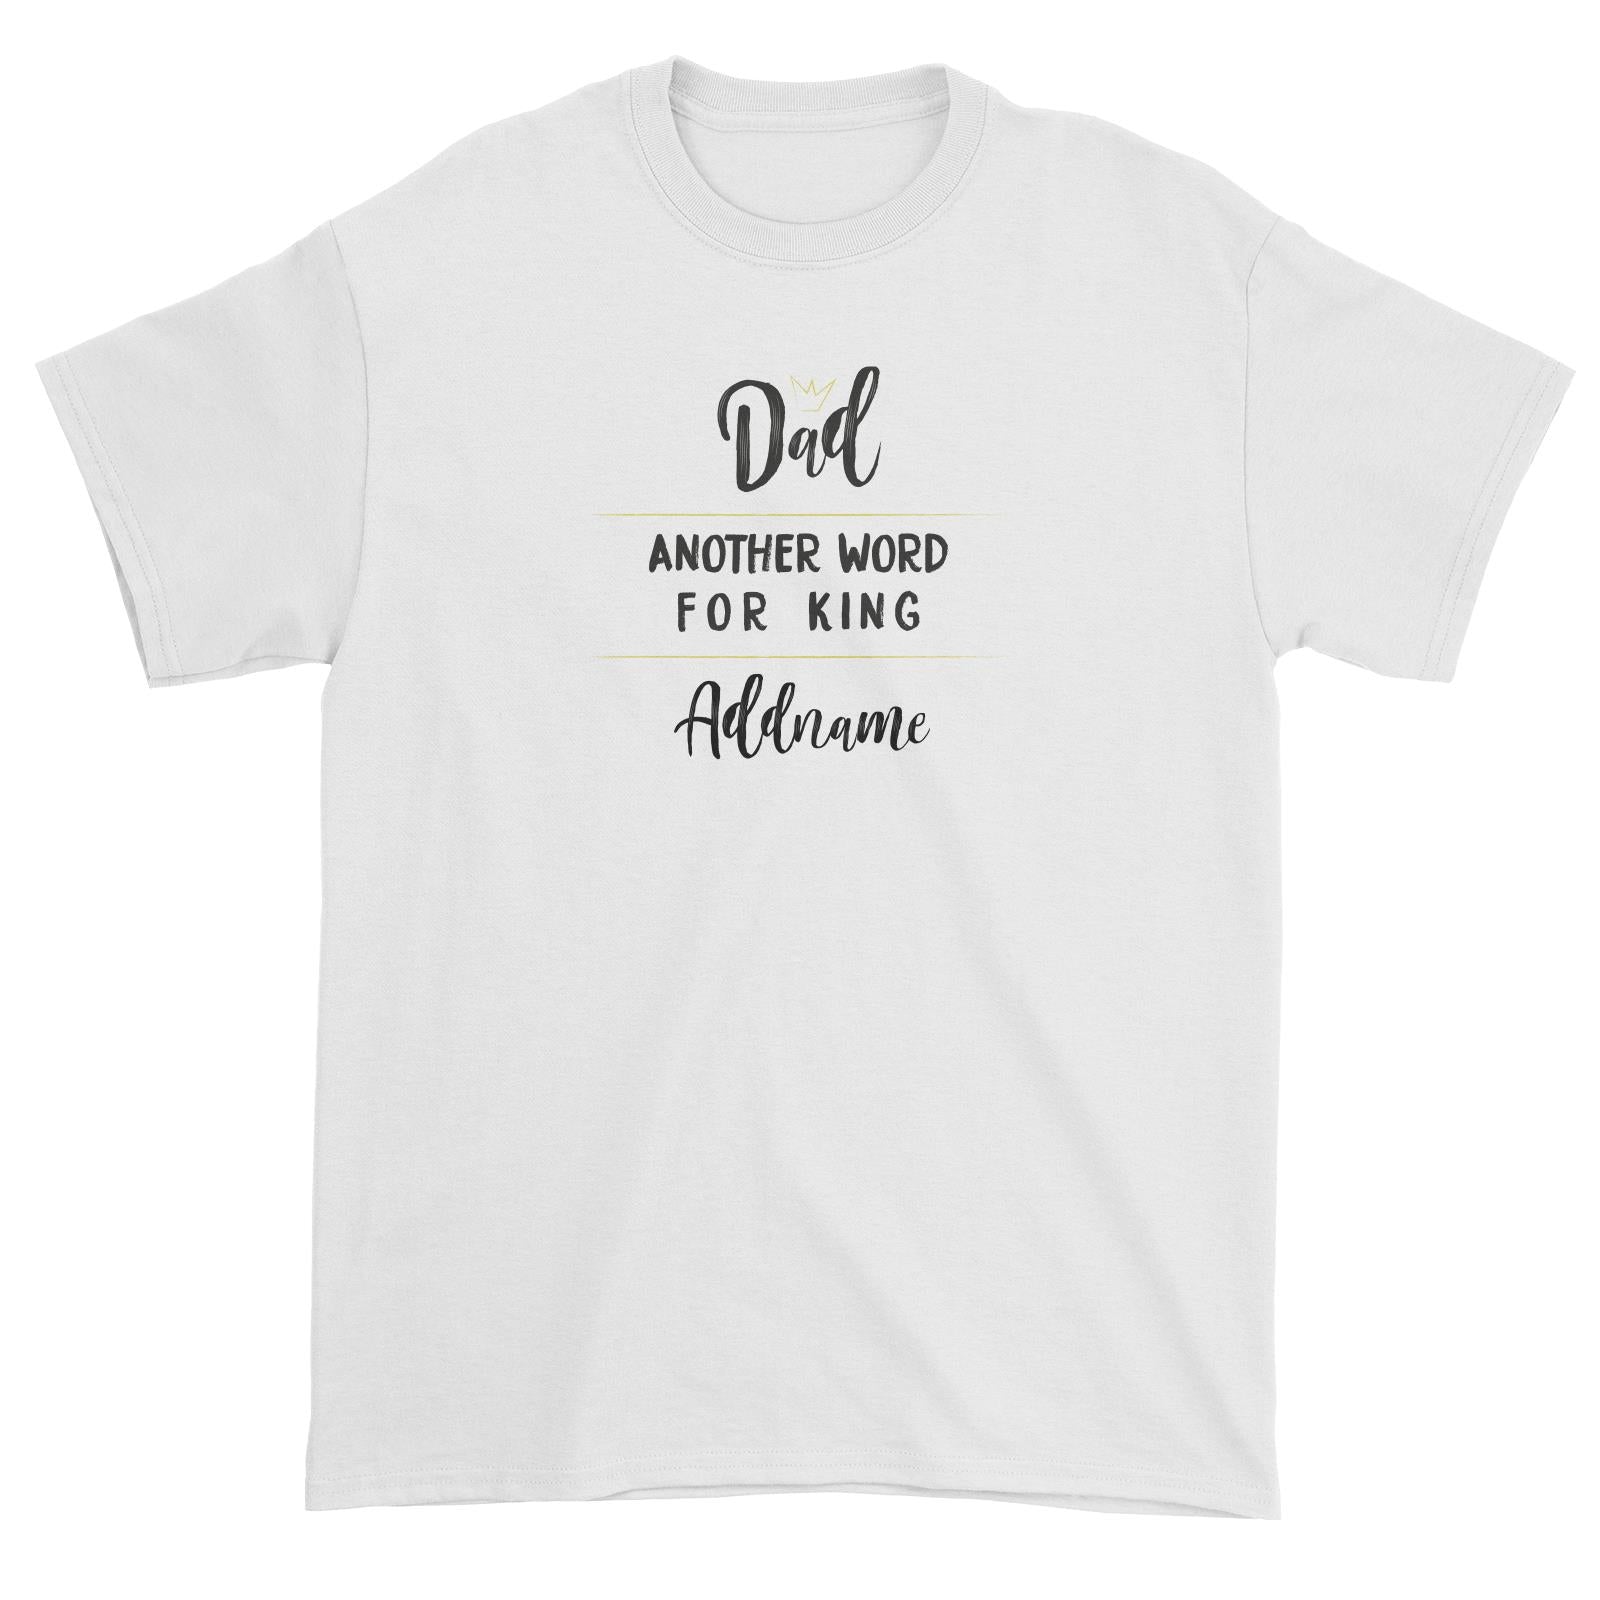 Another Word Family Dad Another Word For King Addname Unisex T-Shirt